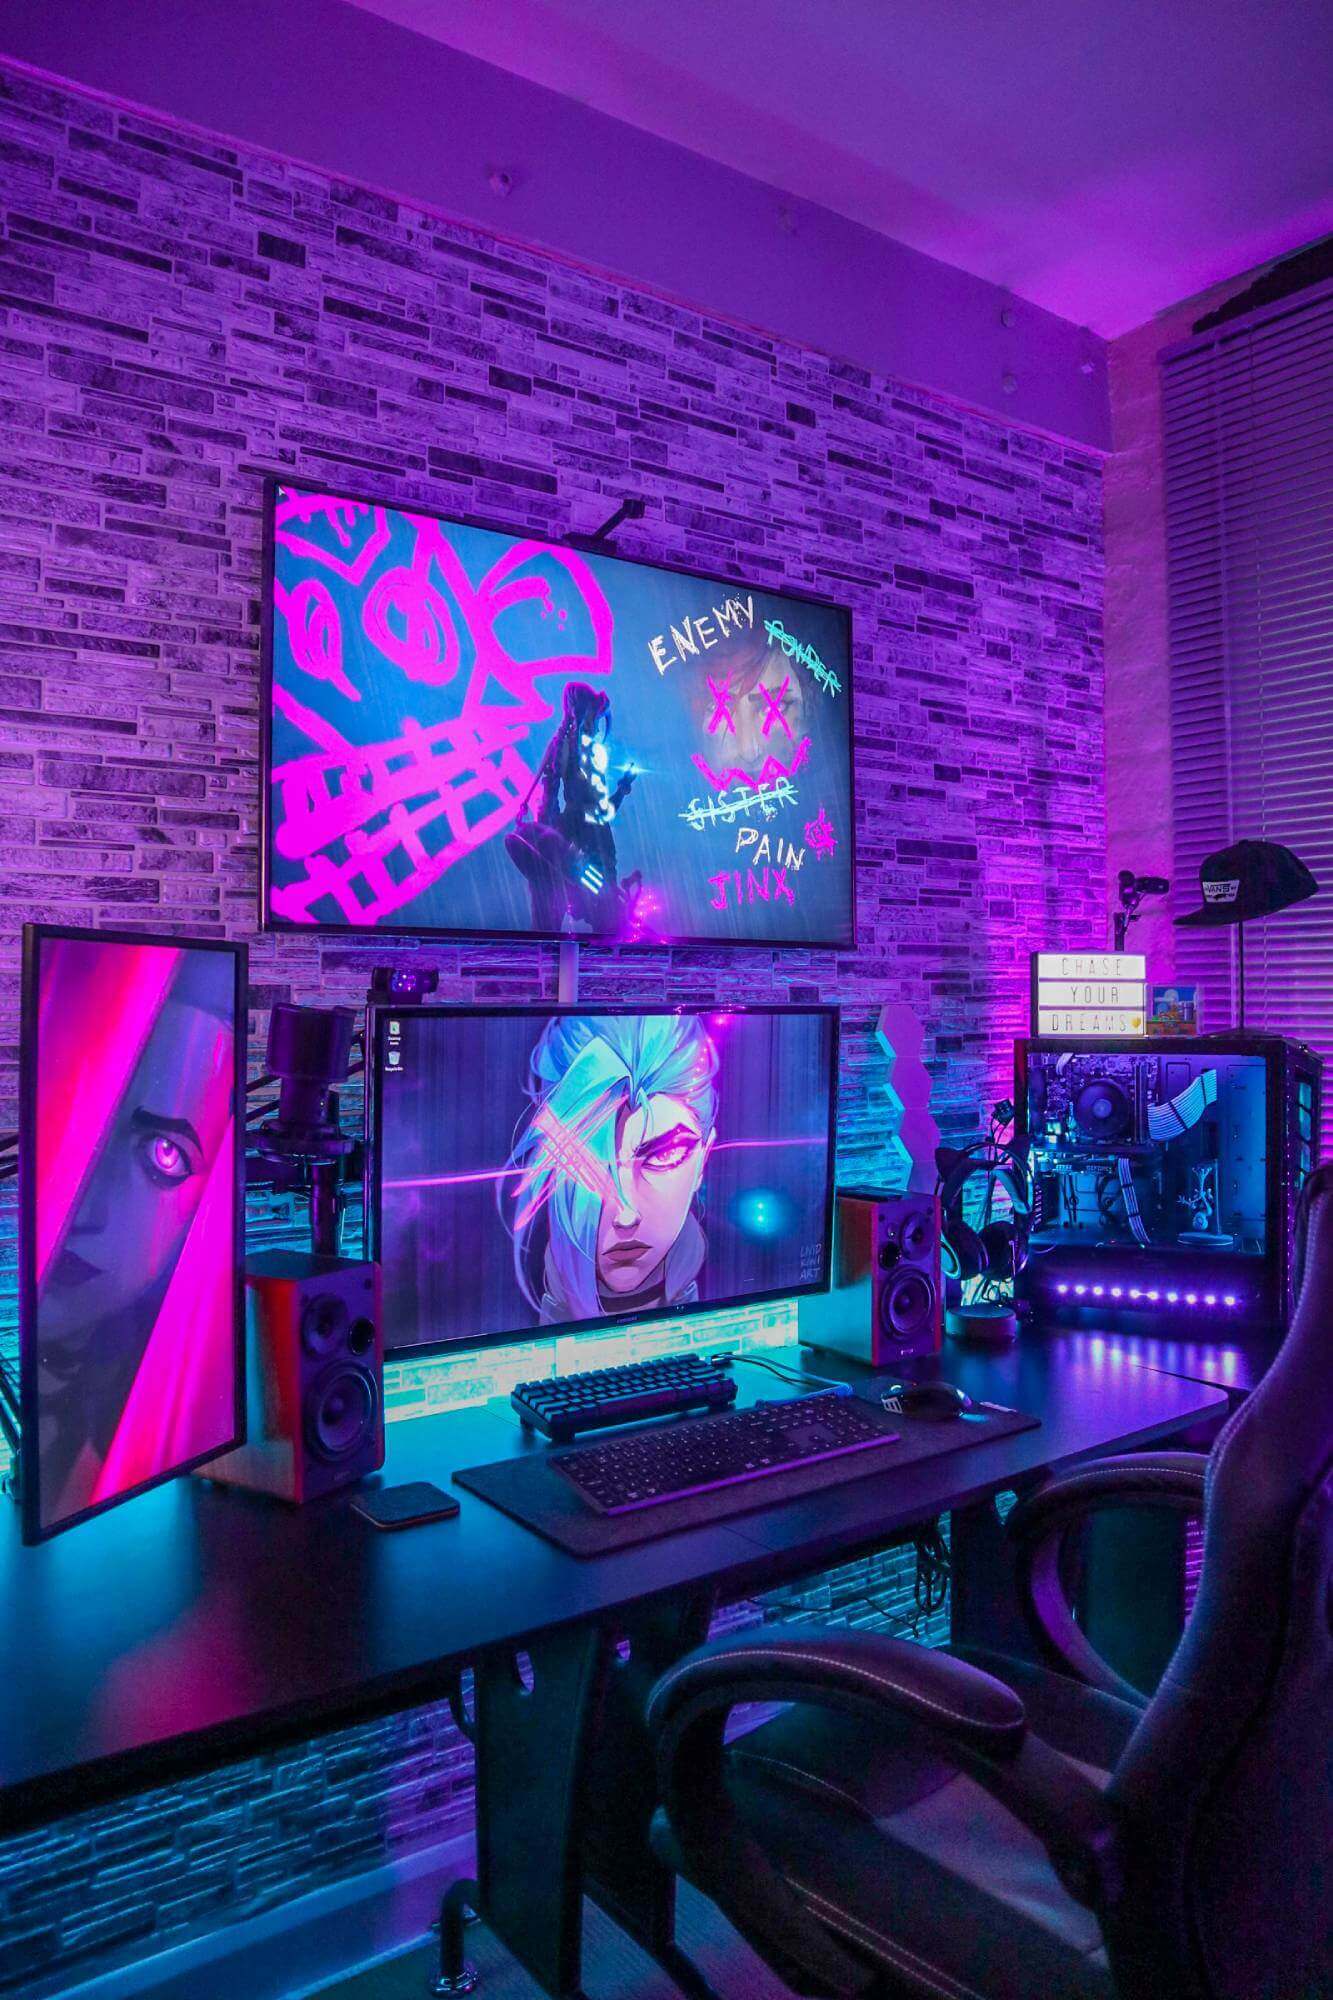 Whole PC Gaming Setup-Complete Setup for Gamers/Streamers